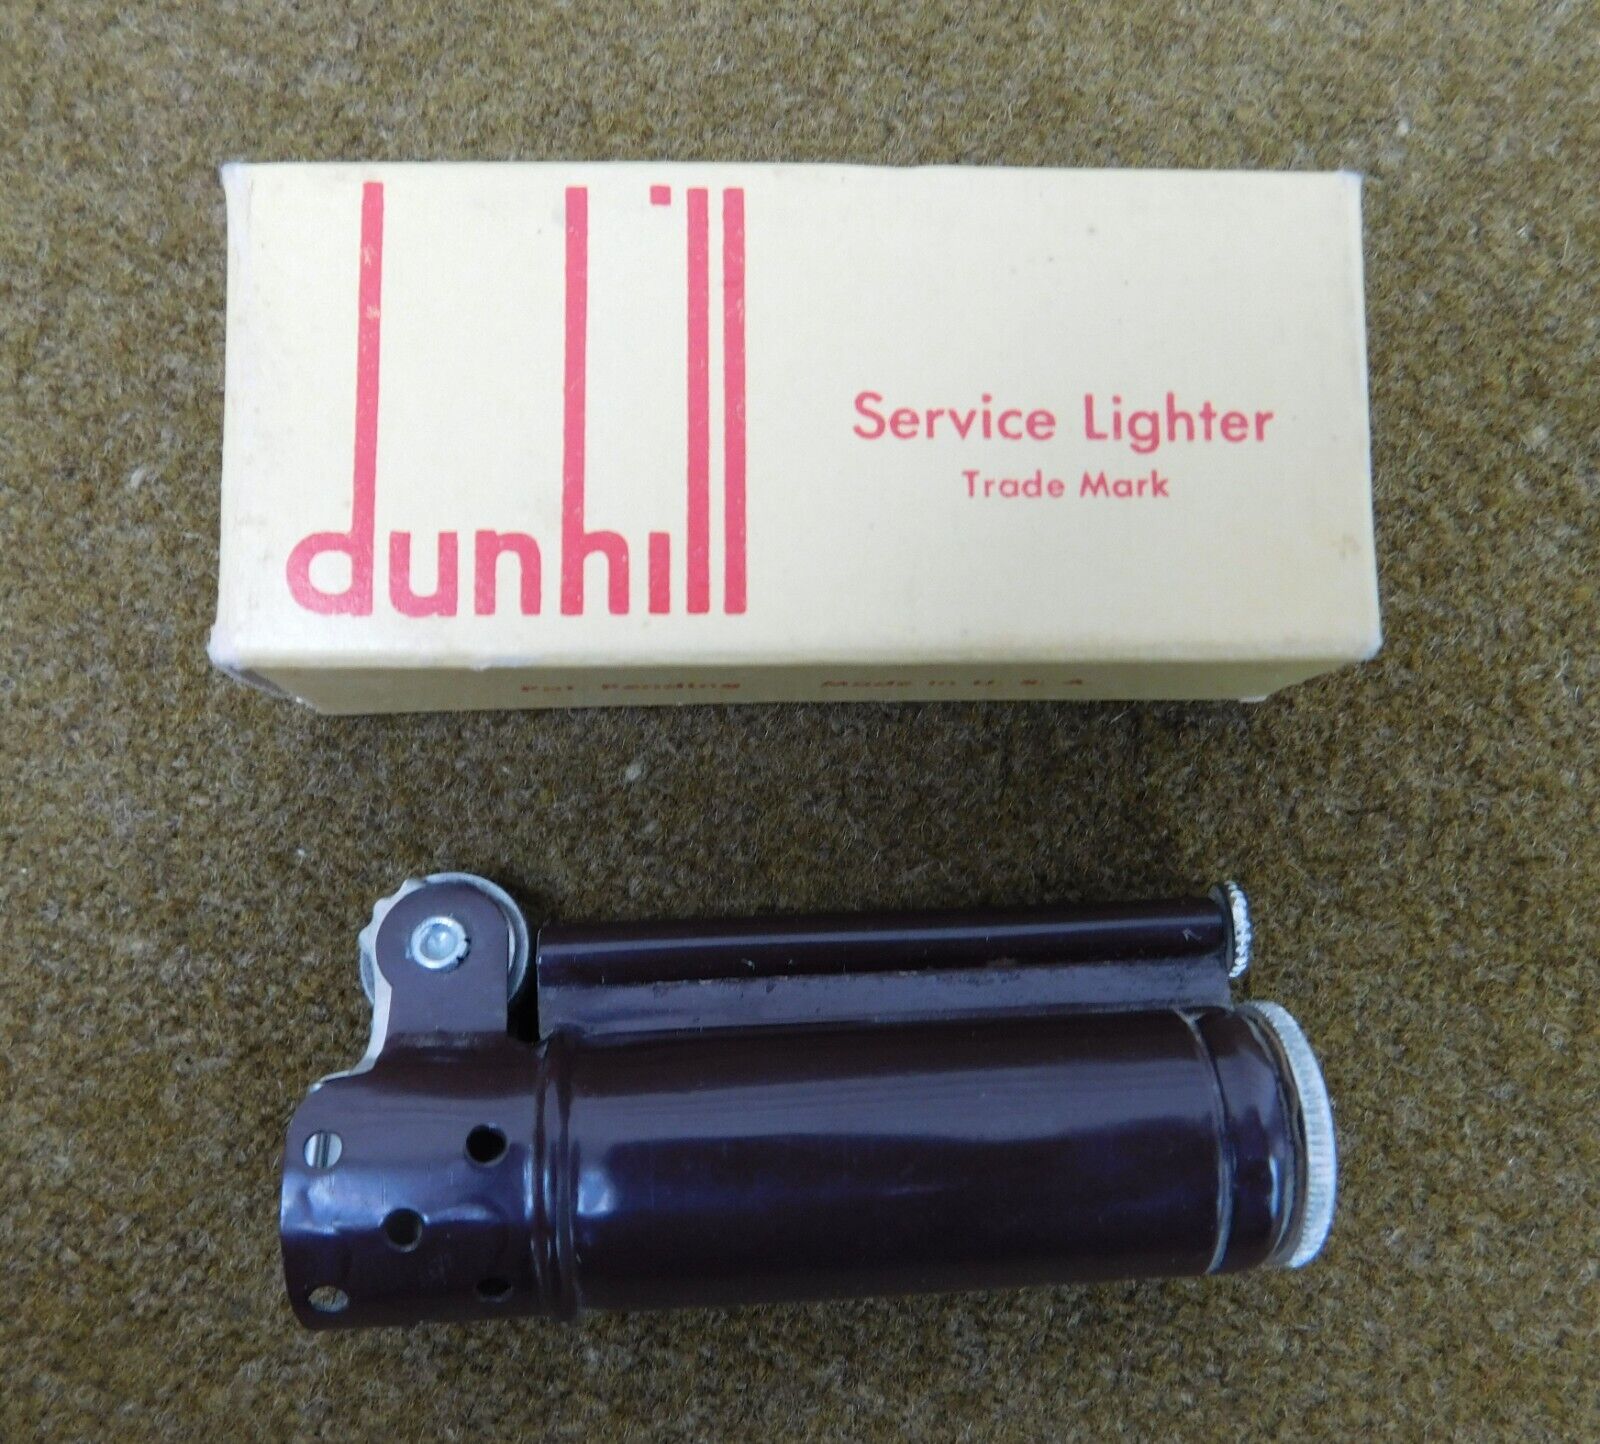 ORIGINAL WWII U.S. DUNHILL SERVICE LIGHTER IN BOX UNFIRED - BROWN